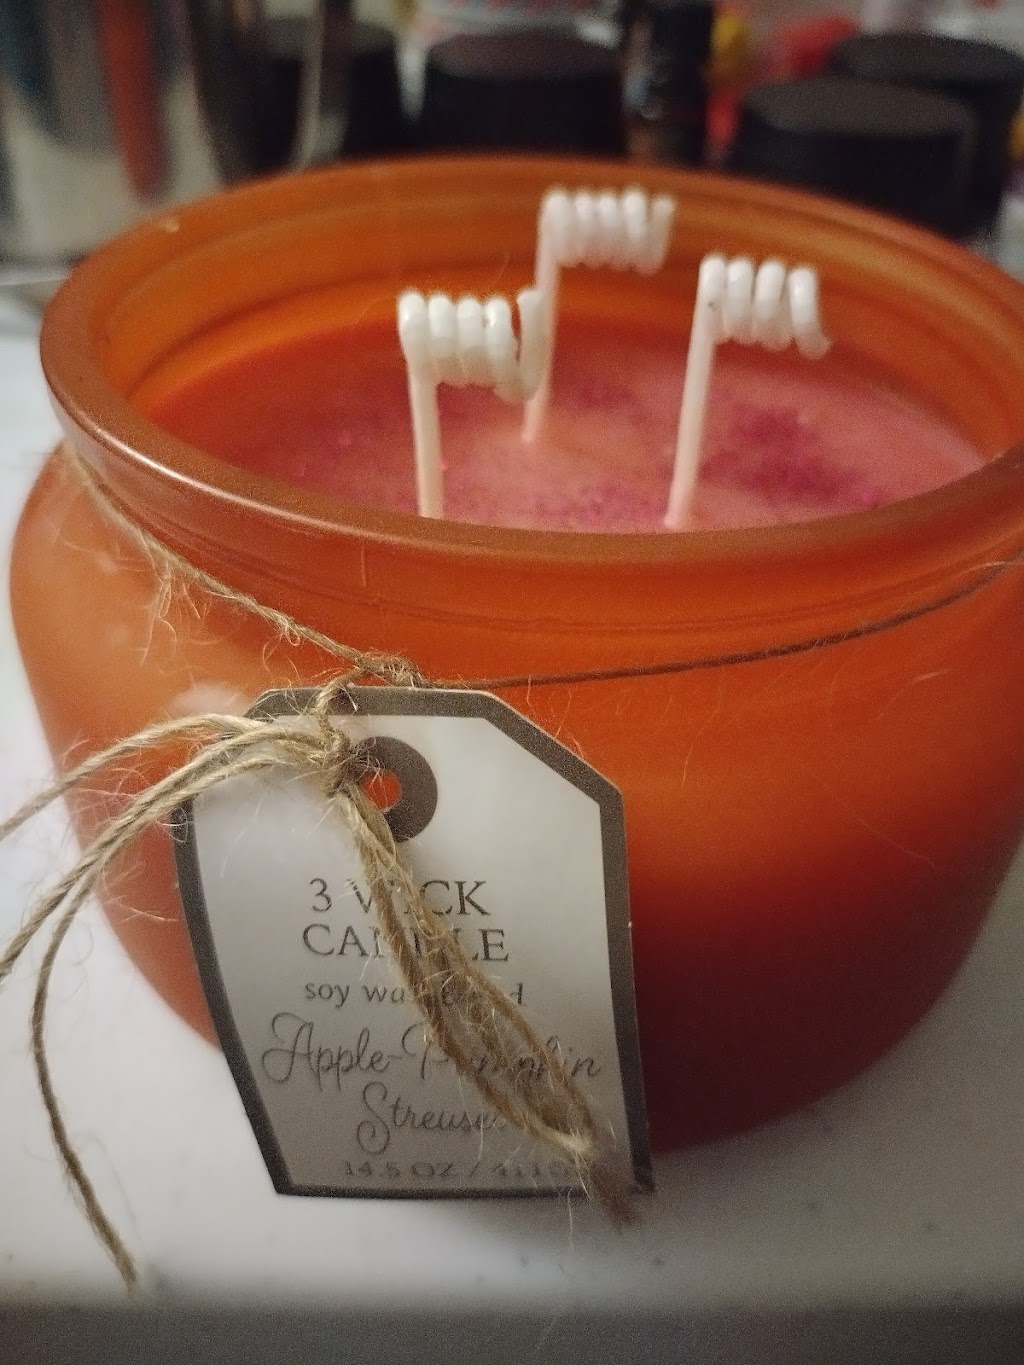 Rozy Day Candles | 125 S White Horse Pike, Lindenwold, NJ 08021 | Phone: (856) 204-4504